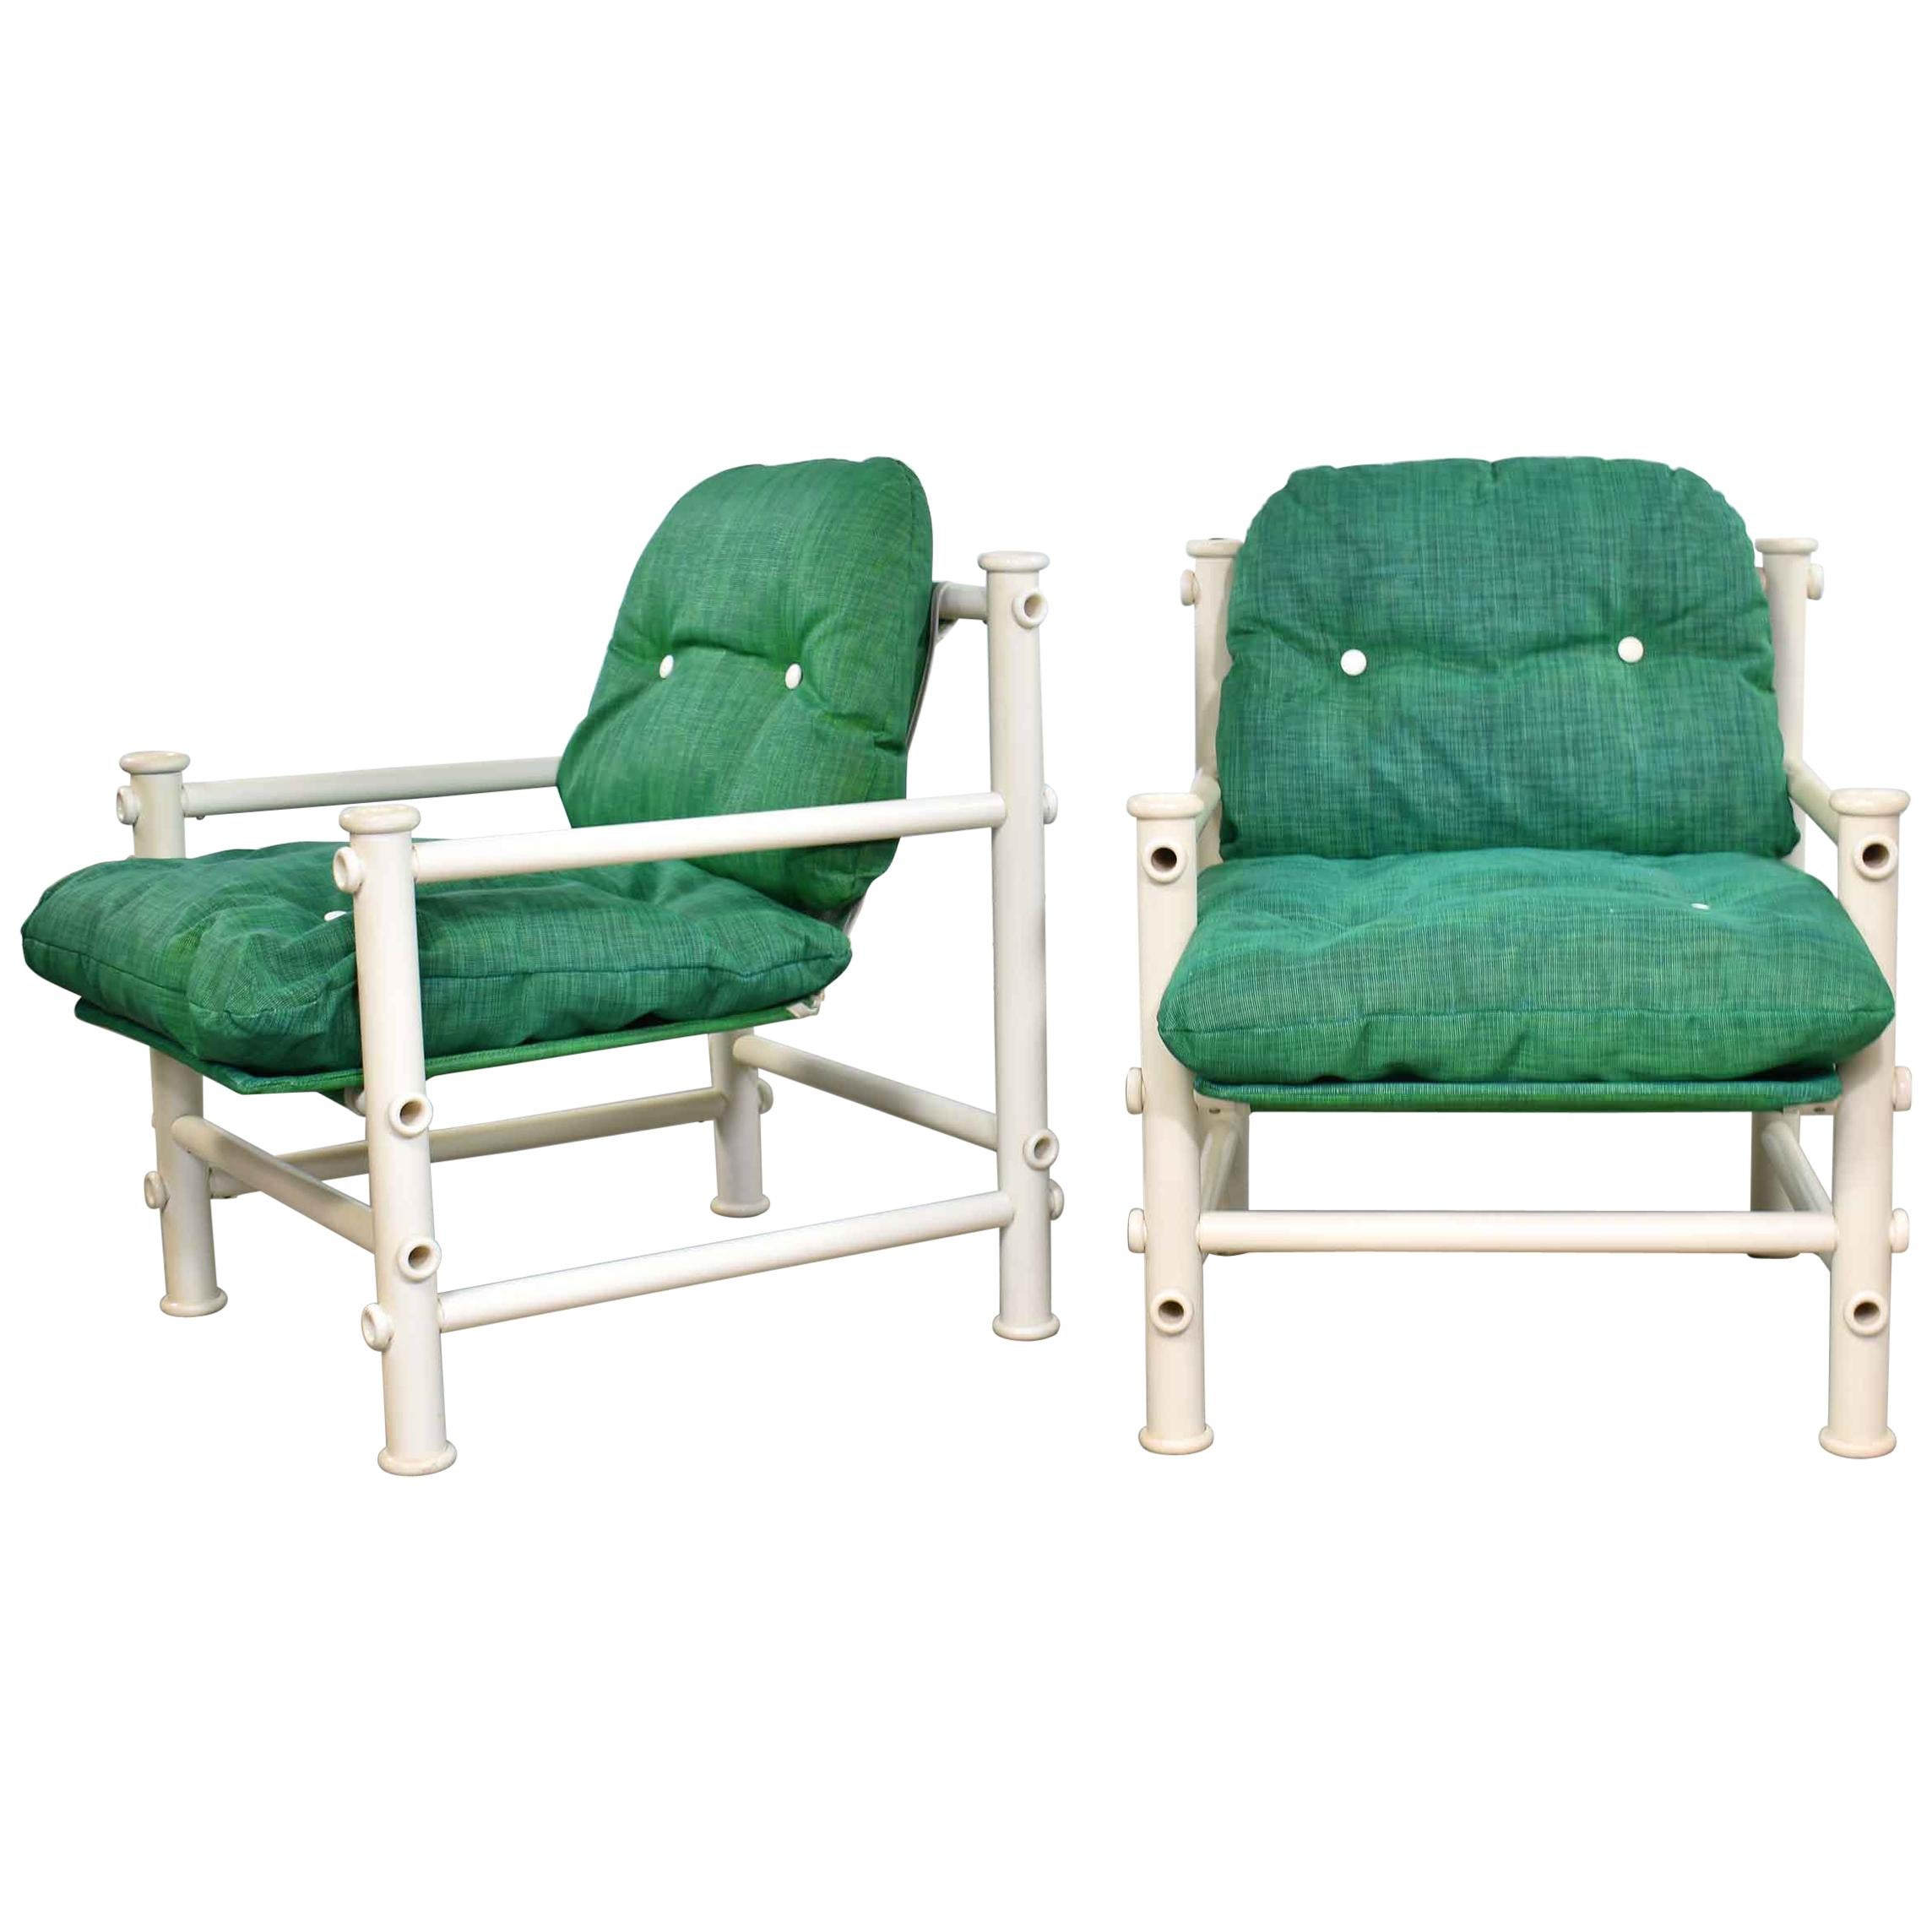 2 Jerry Johnson Landes PVC Outdoor Idyllwild Lounge Chairs Green Mesh Upholstery